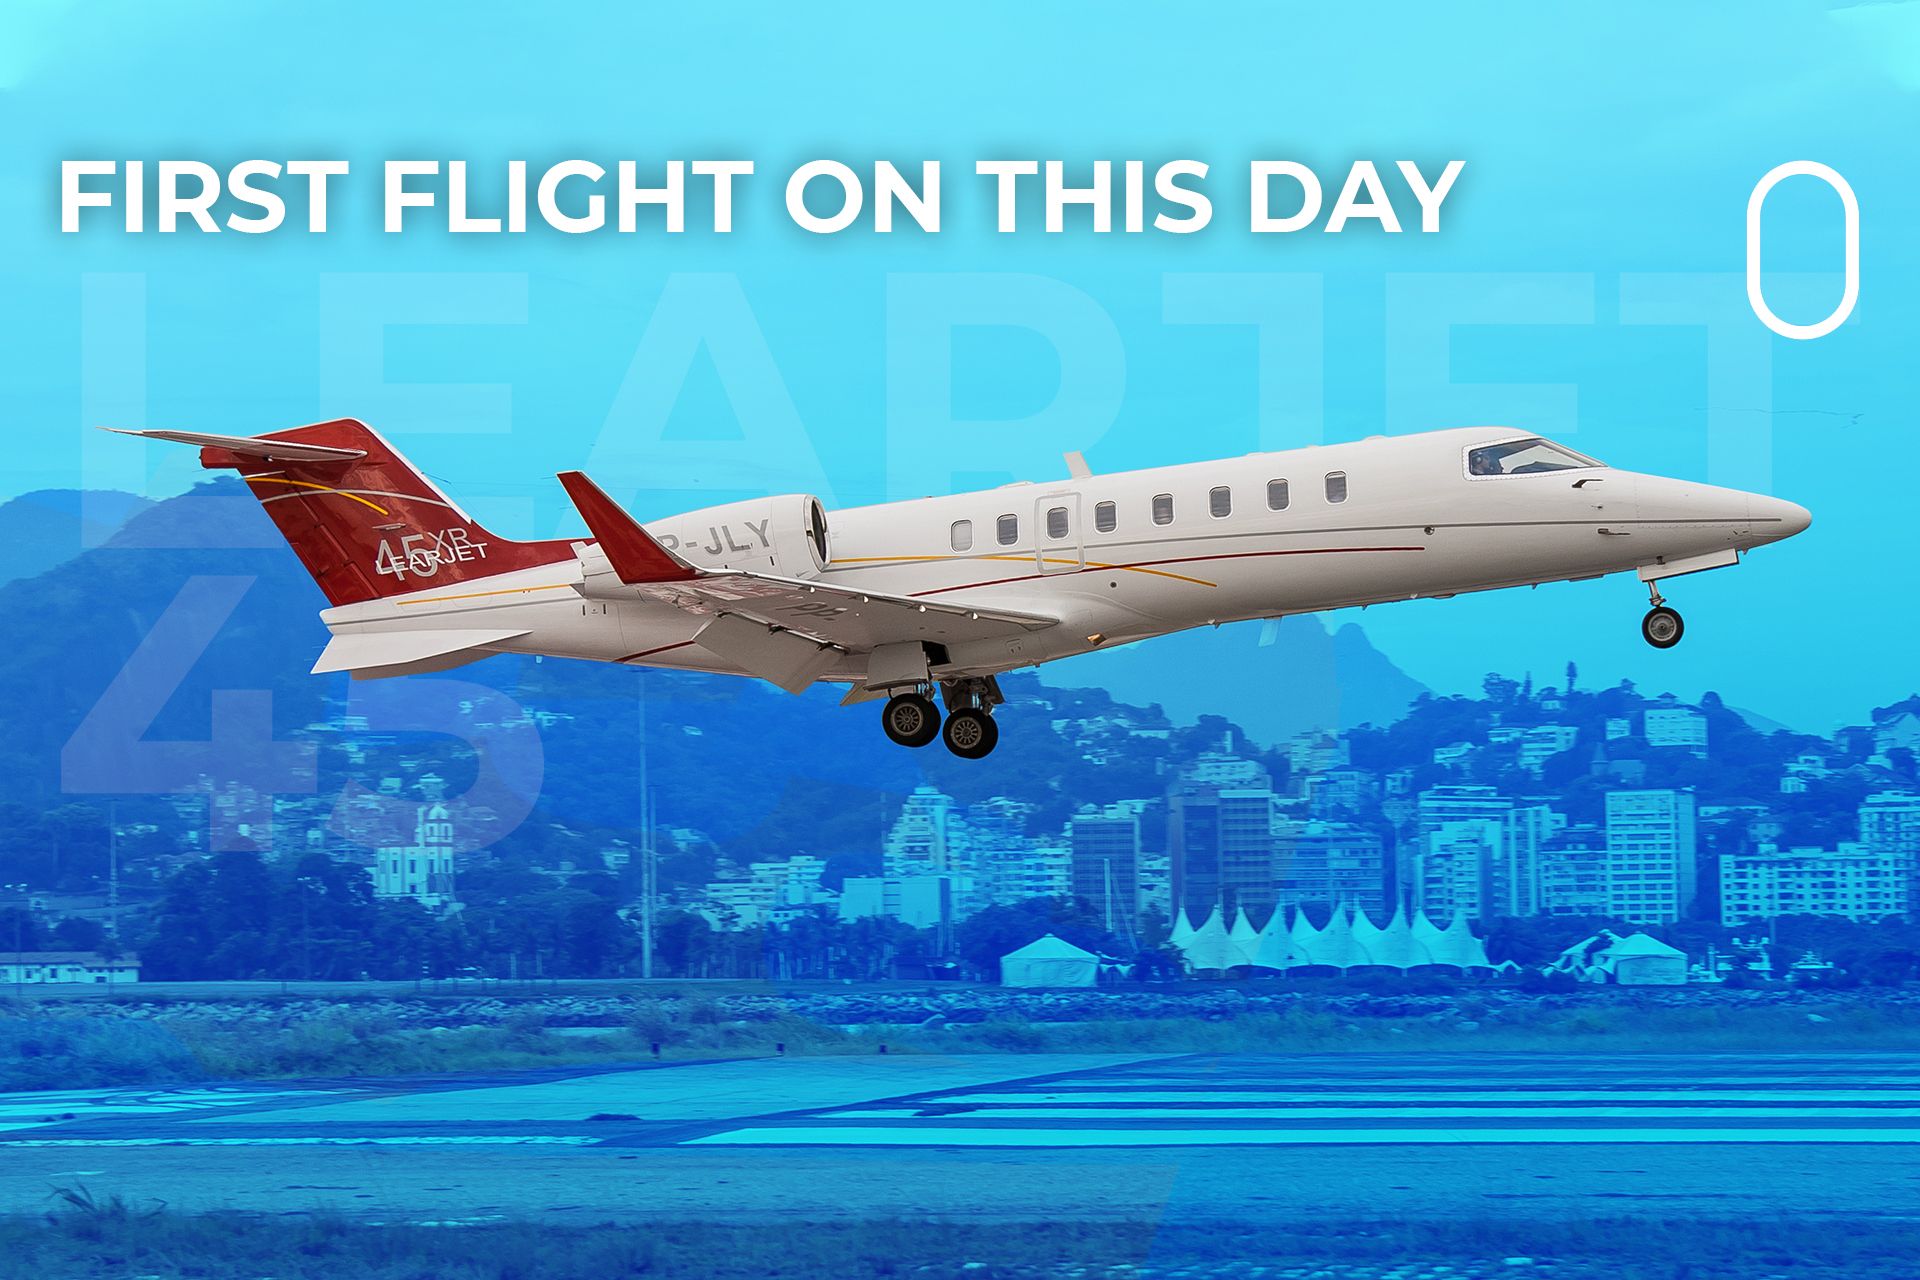 On This Day In 1995 The Learjet 45 Flew For The First Time